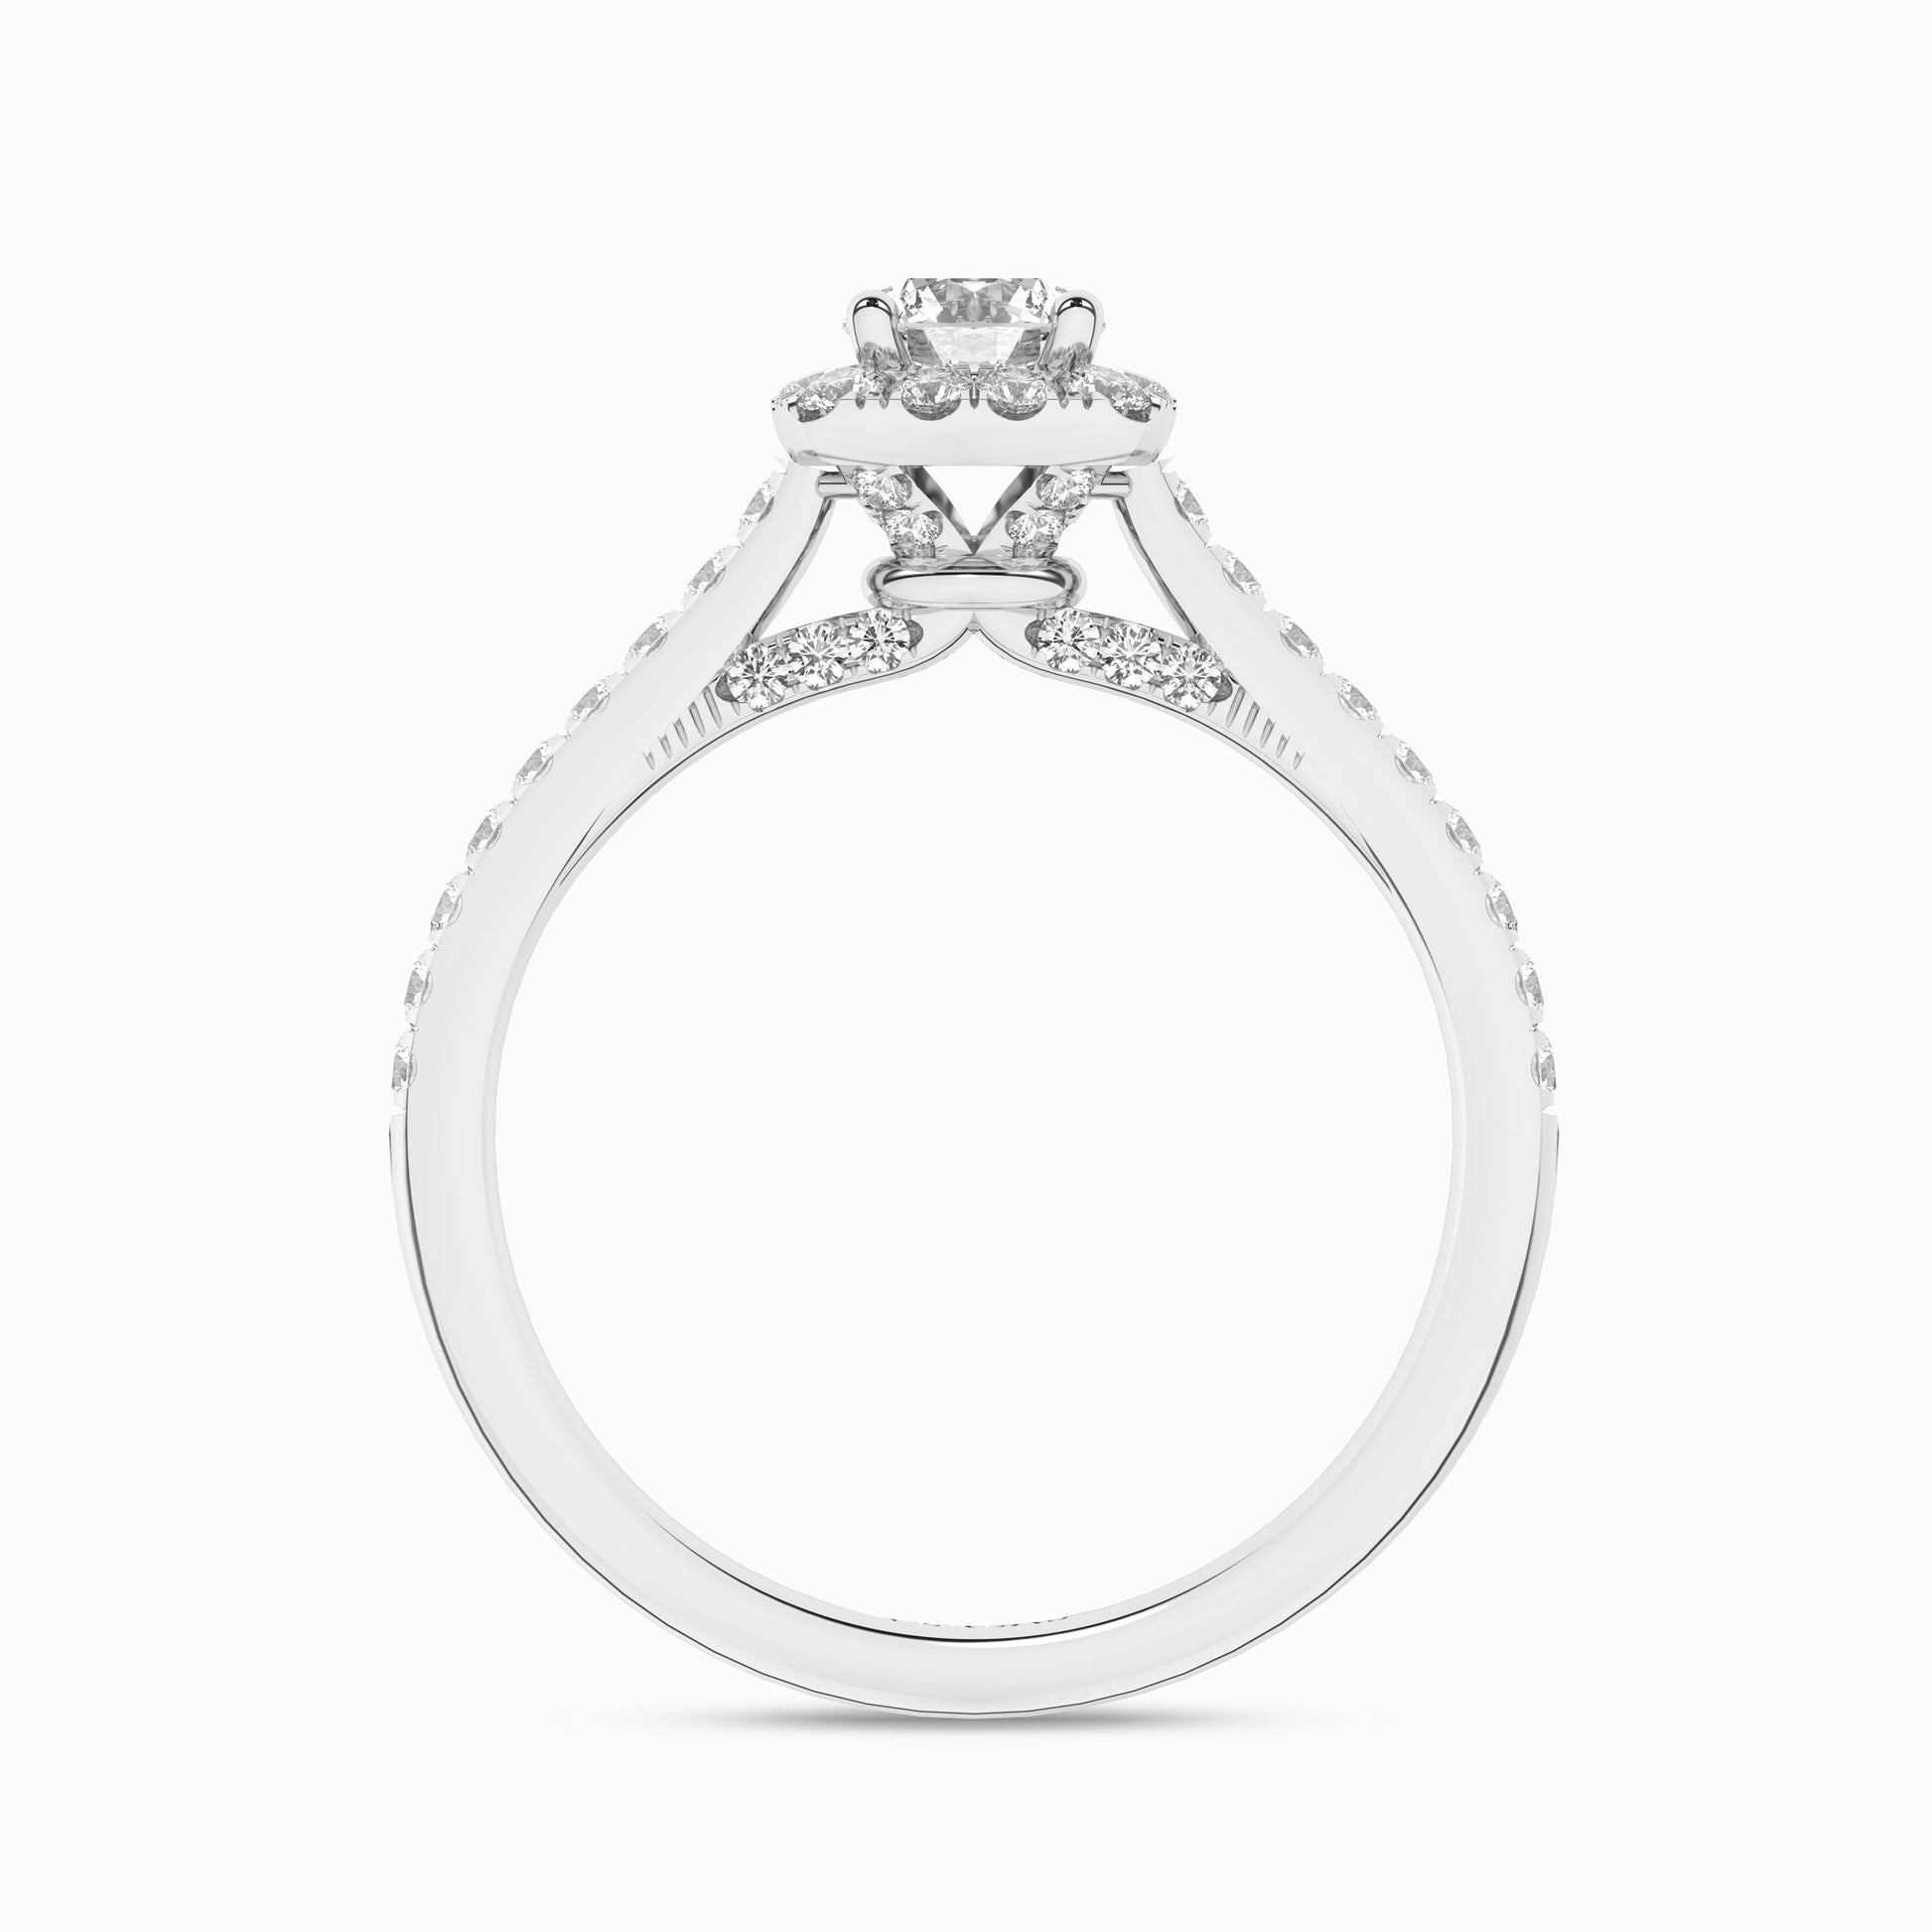 Round-Center Princess Halo Ring_Product Angle_3/4Ct. - 2